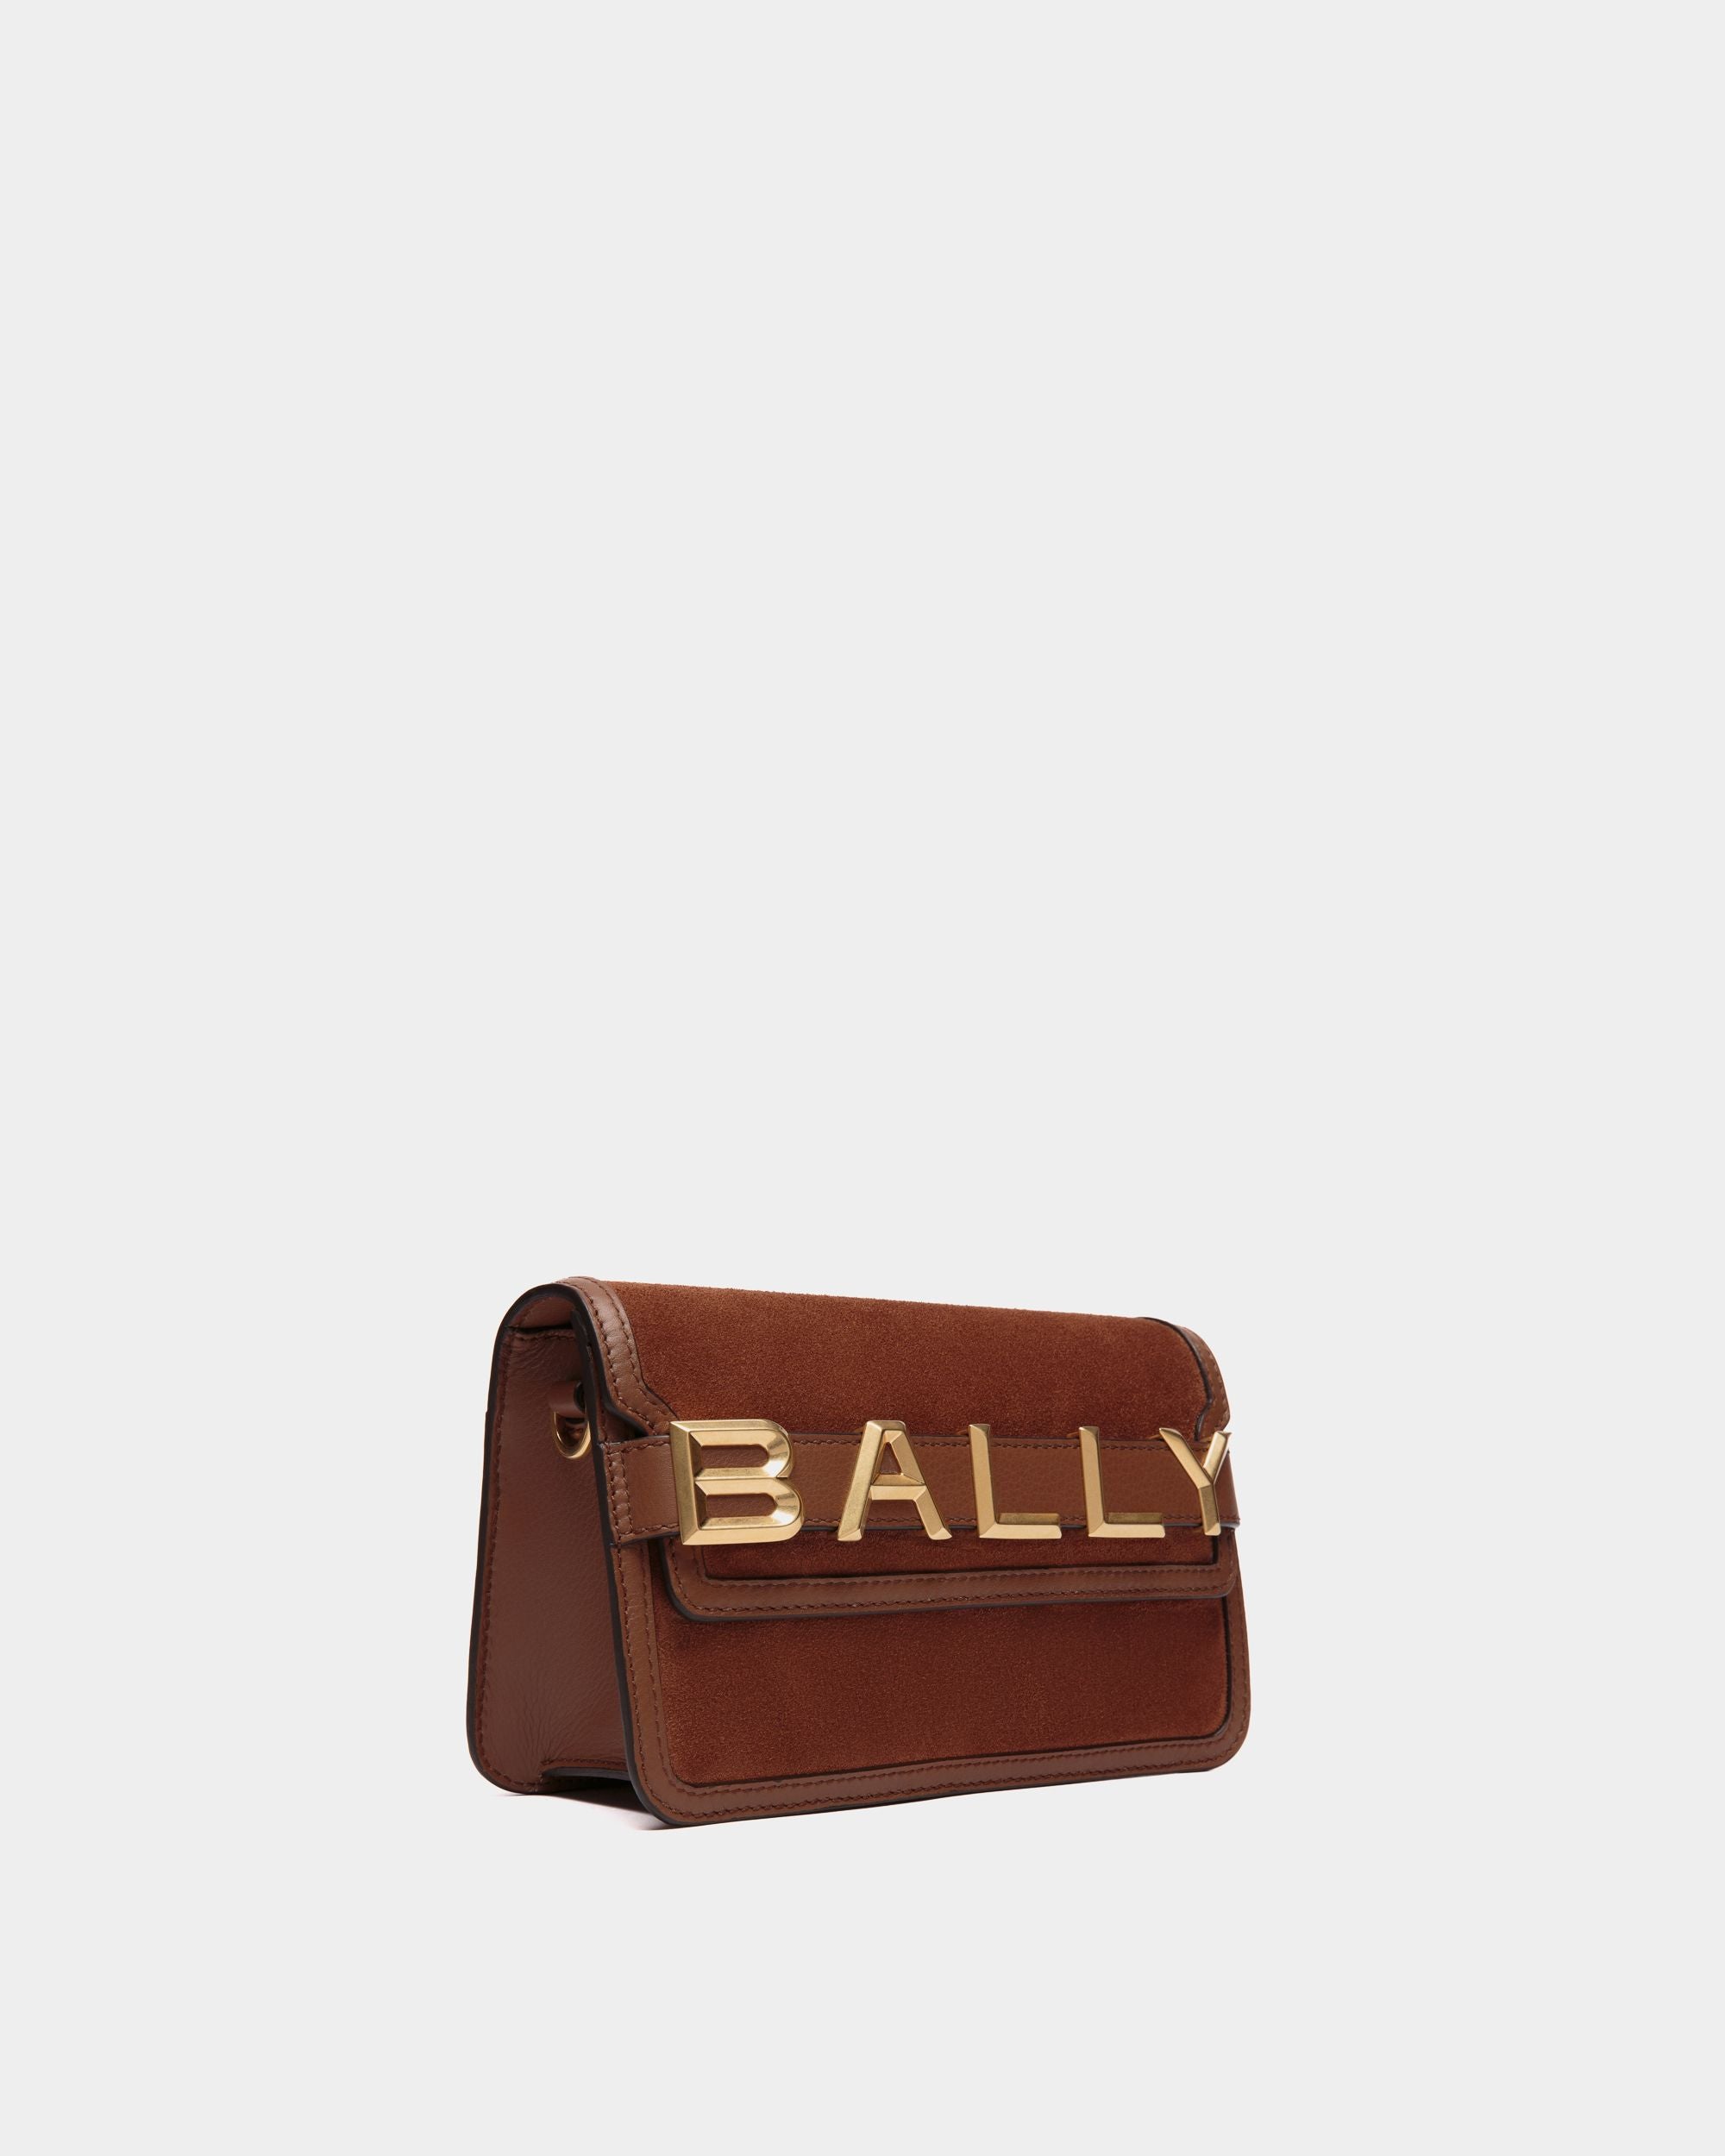 Bally Spell | Women's Crossbody Bag in Brown Suede | Bally | Still Life 3/4 Front